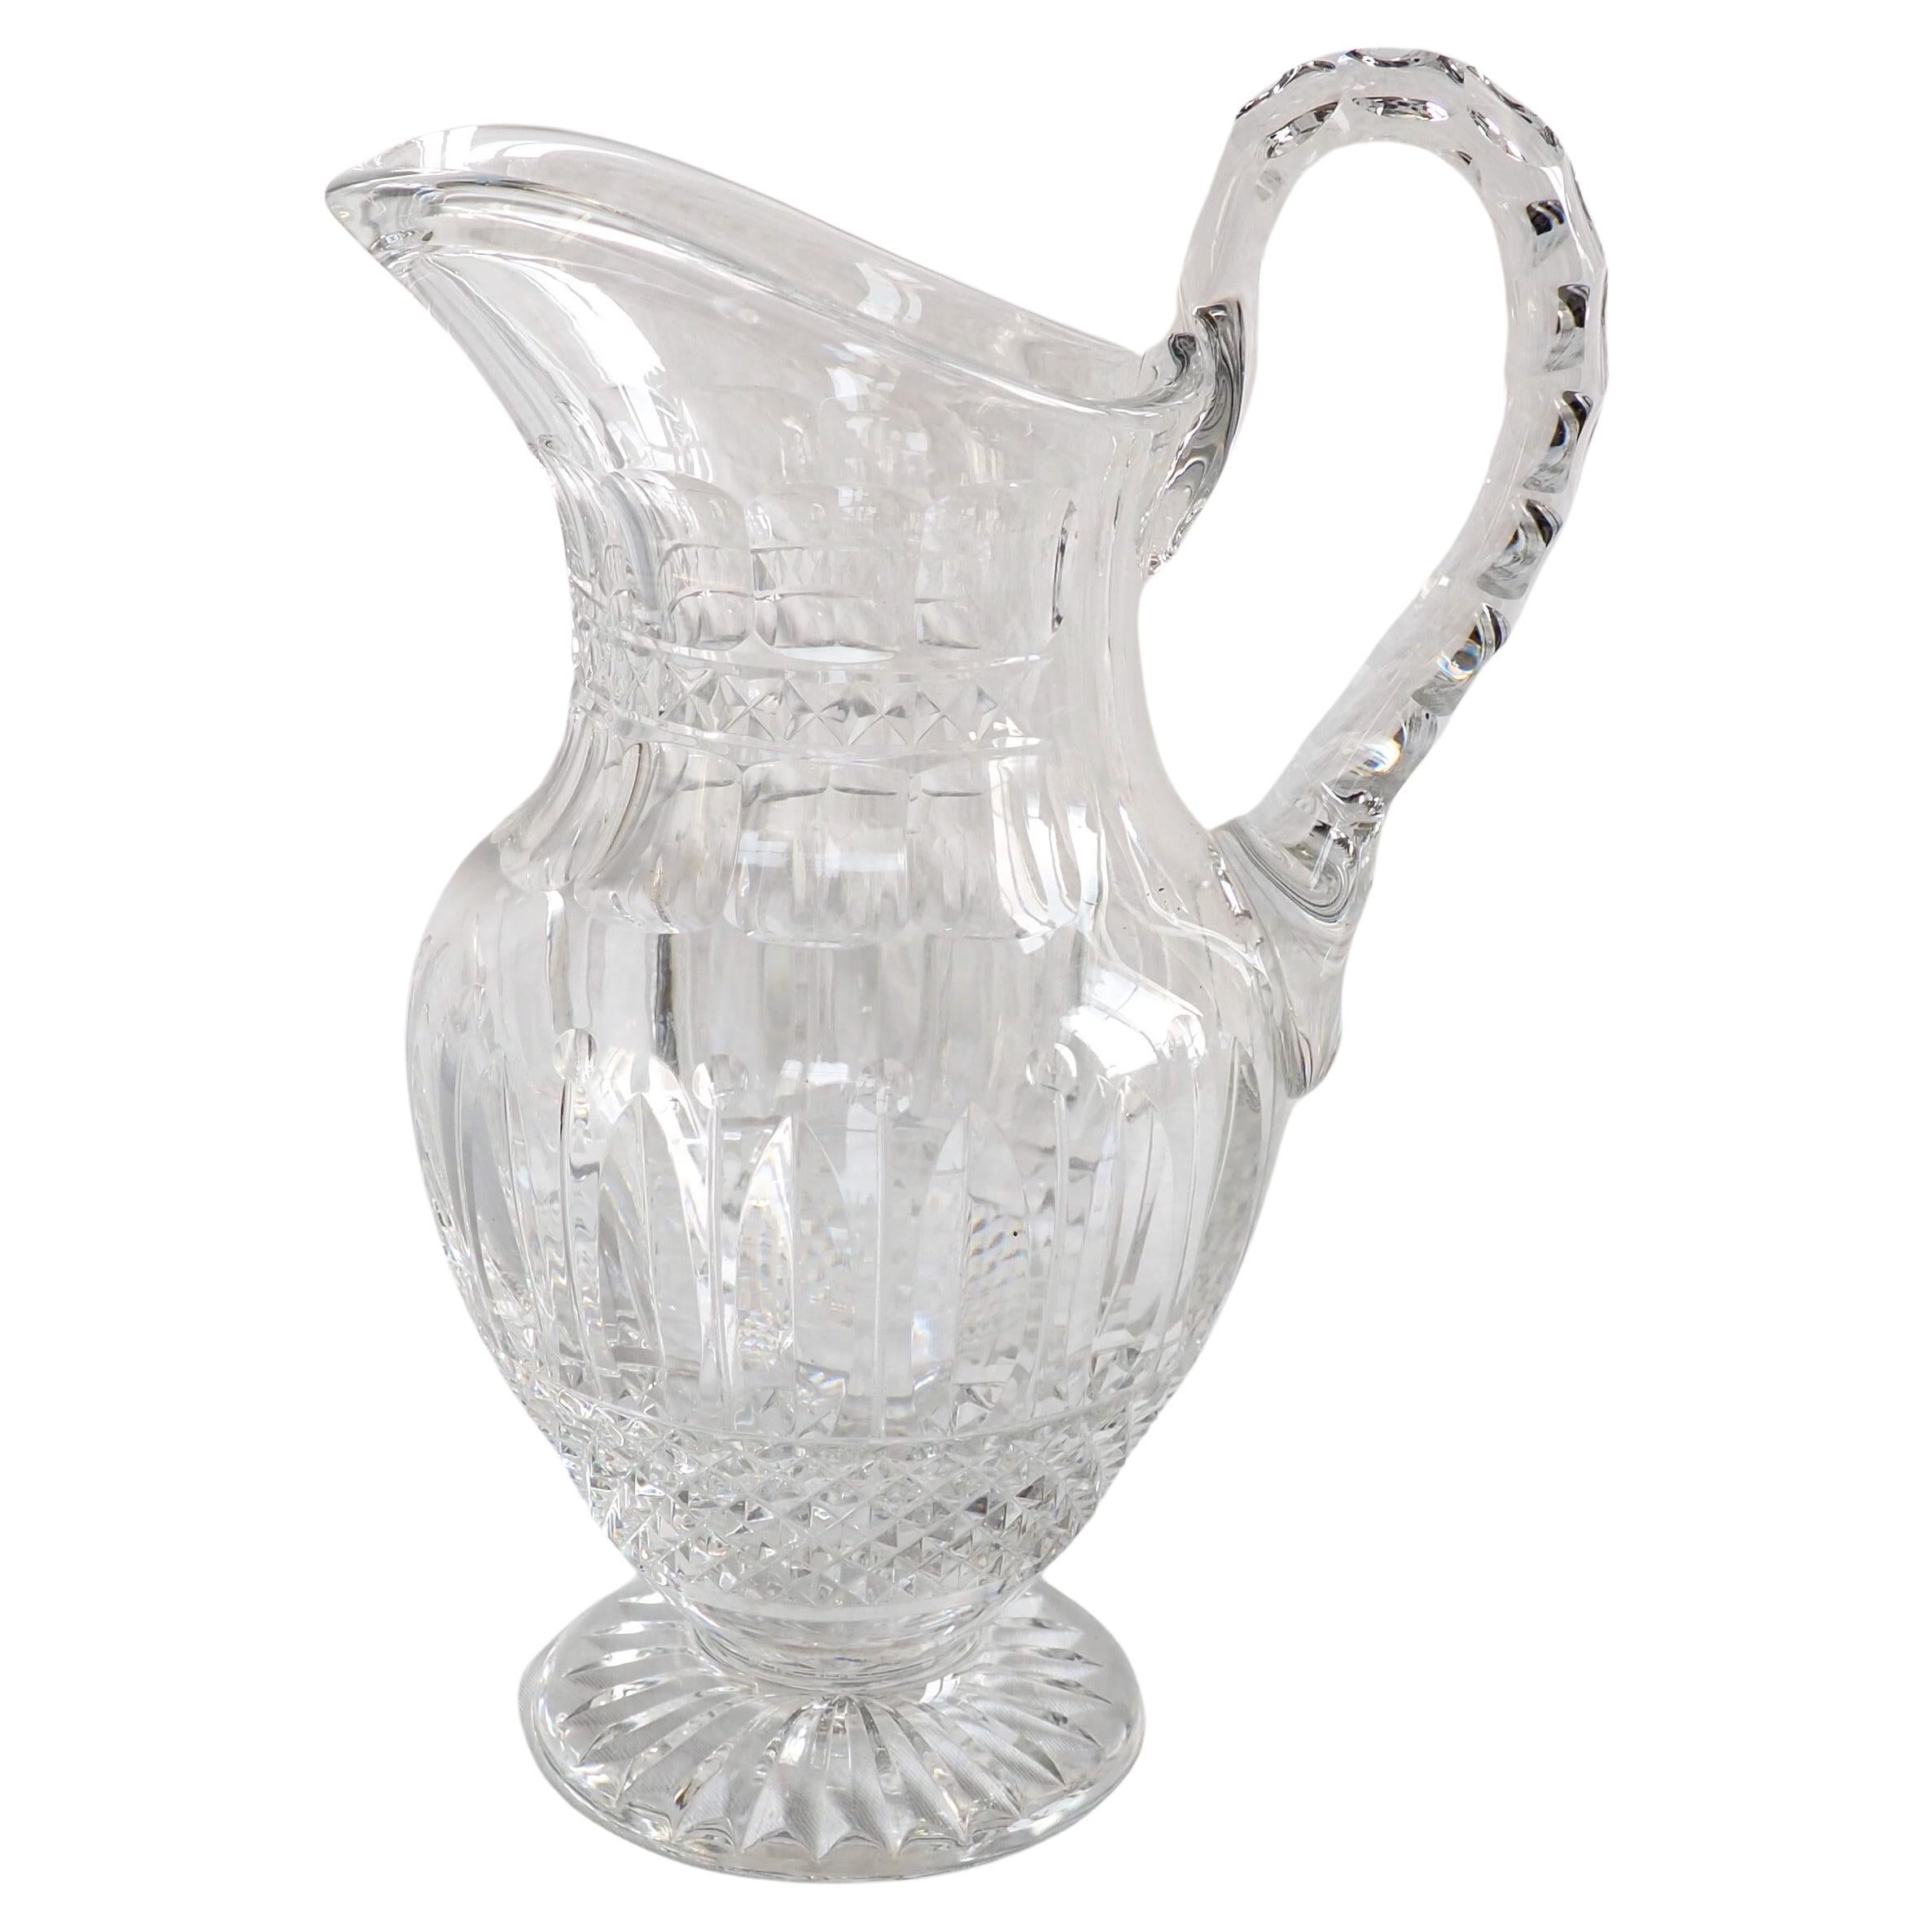 St Louis crystal water pitcher - ewer - Tommy pattern - signed